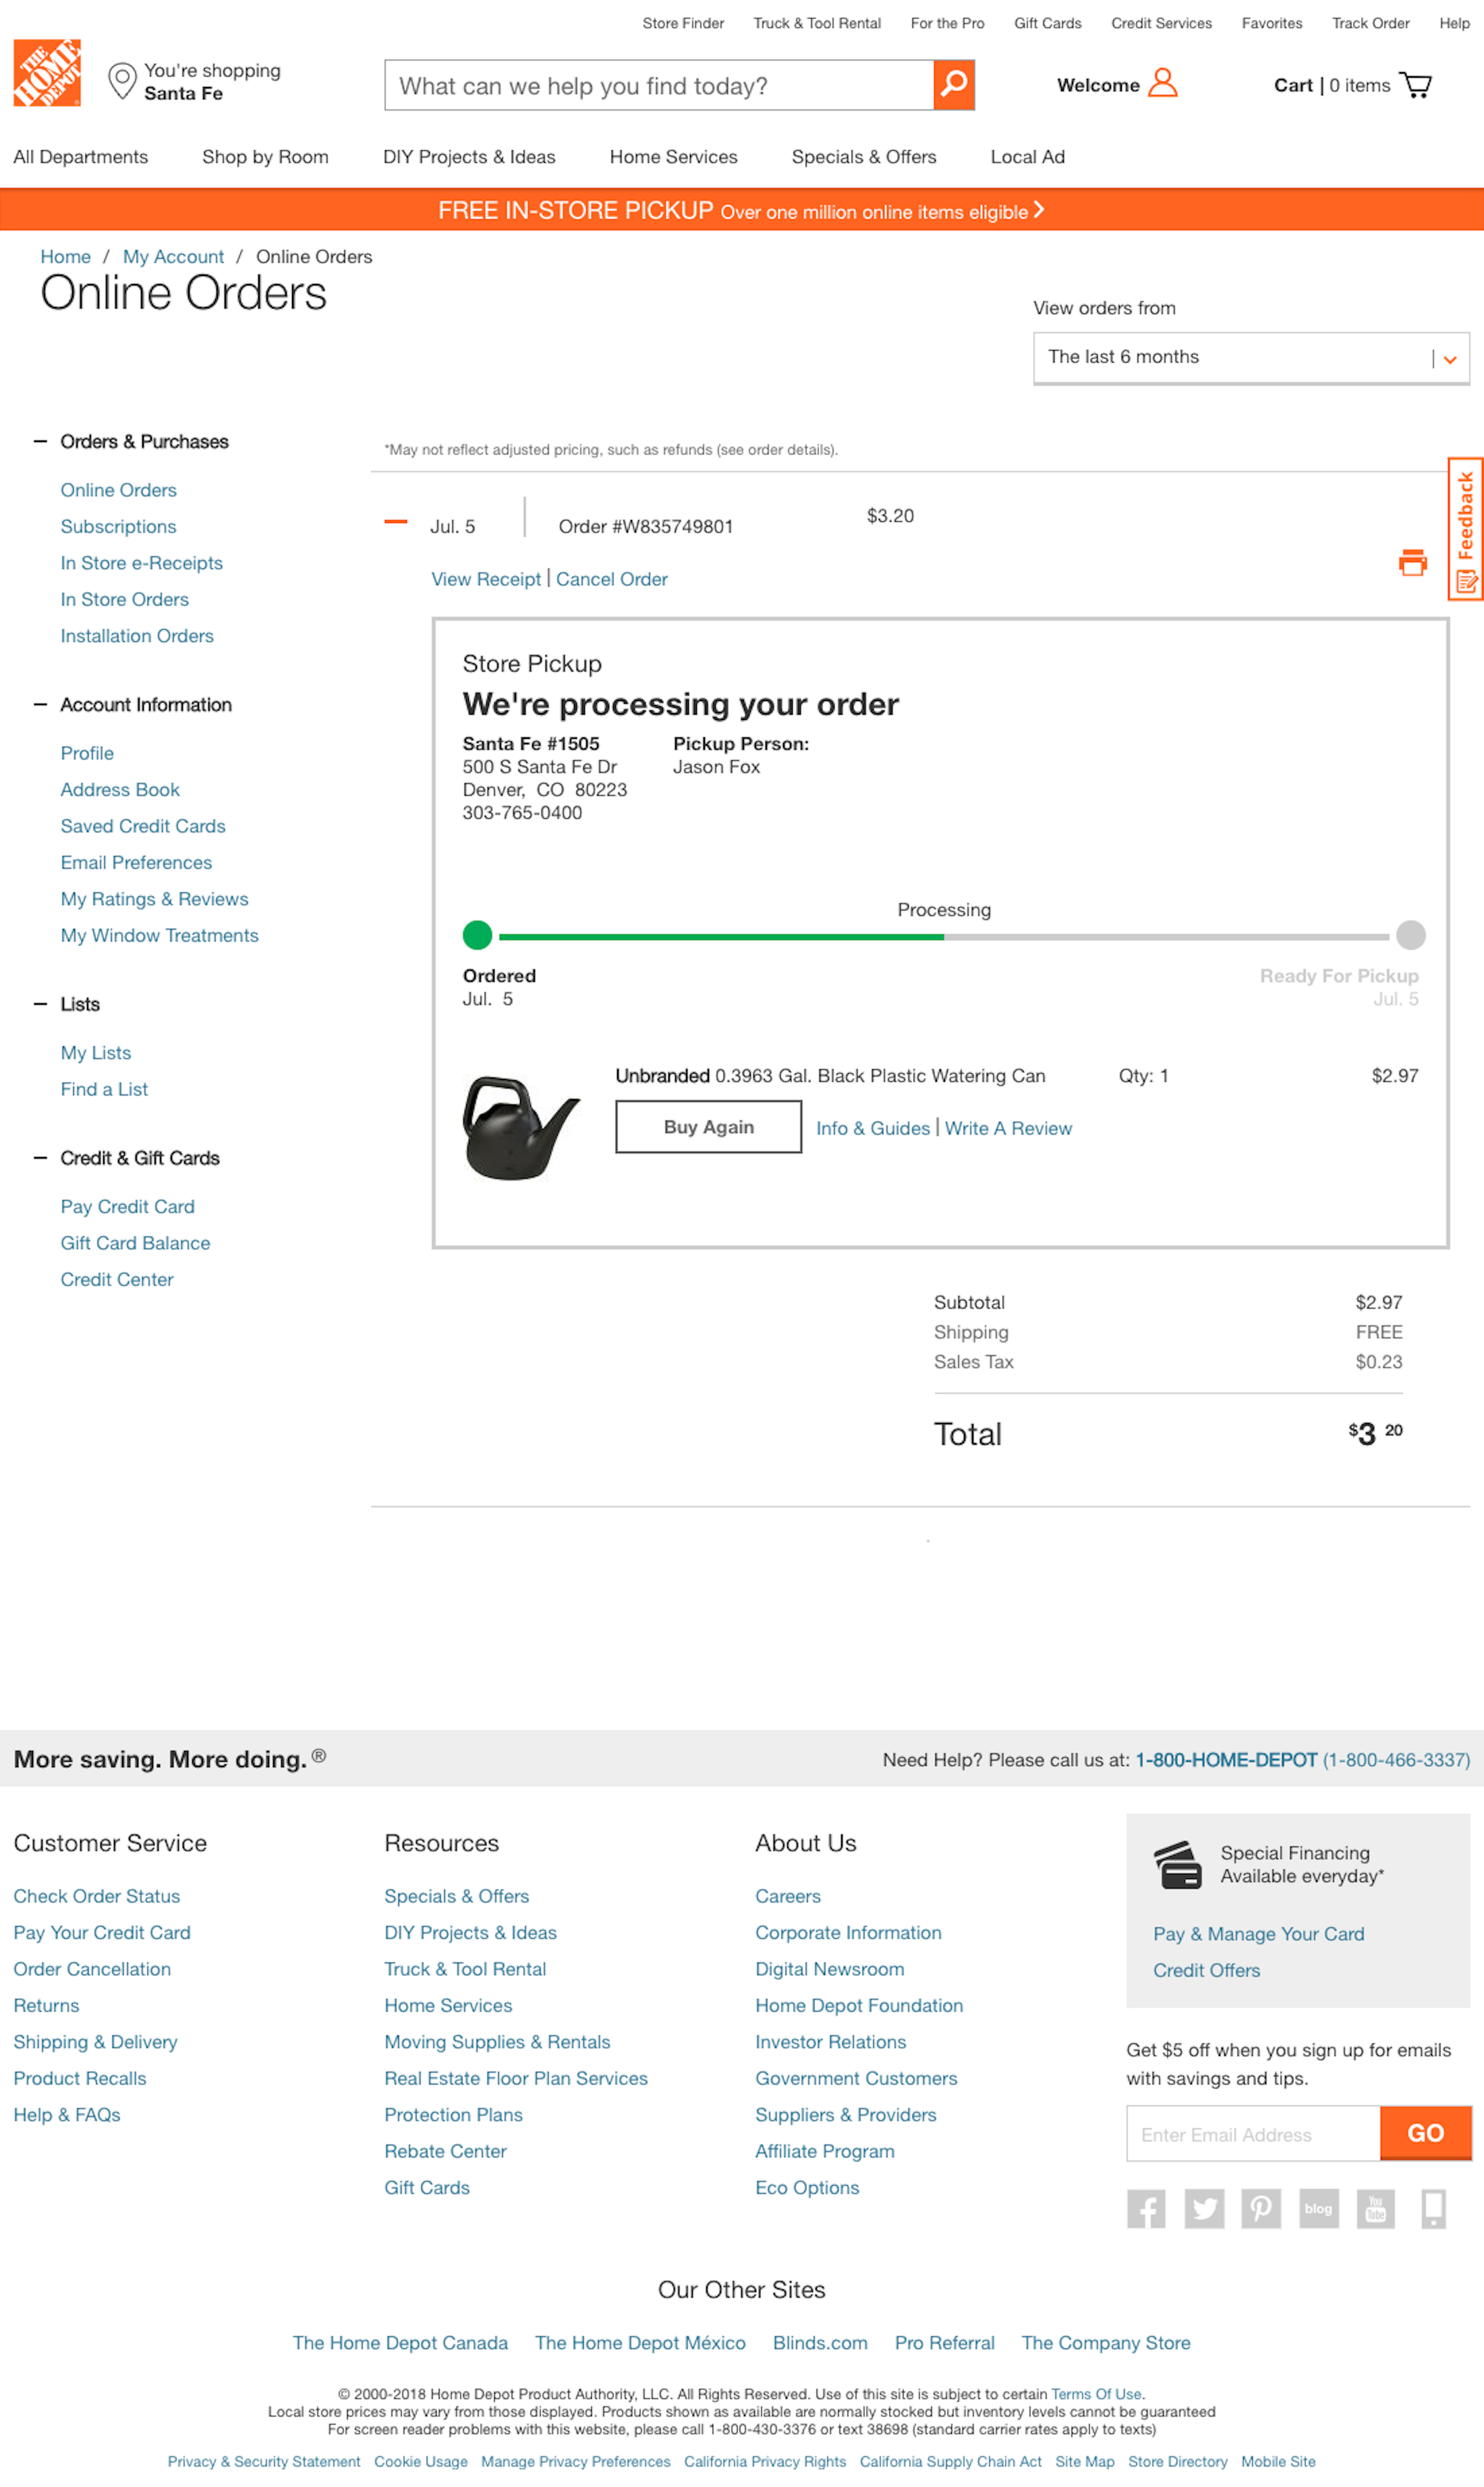 home-depot-s-order-tracking-page-54-of-91-order-tracking-page